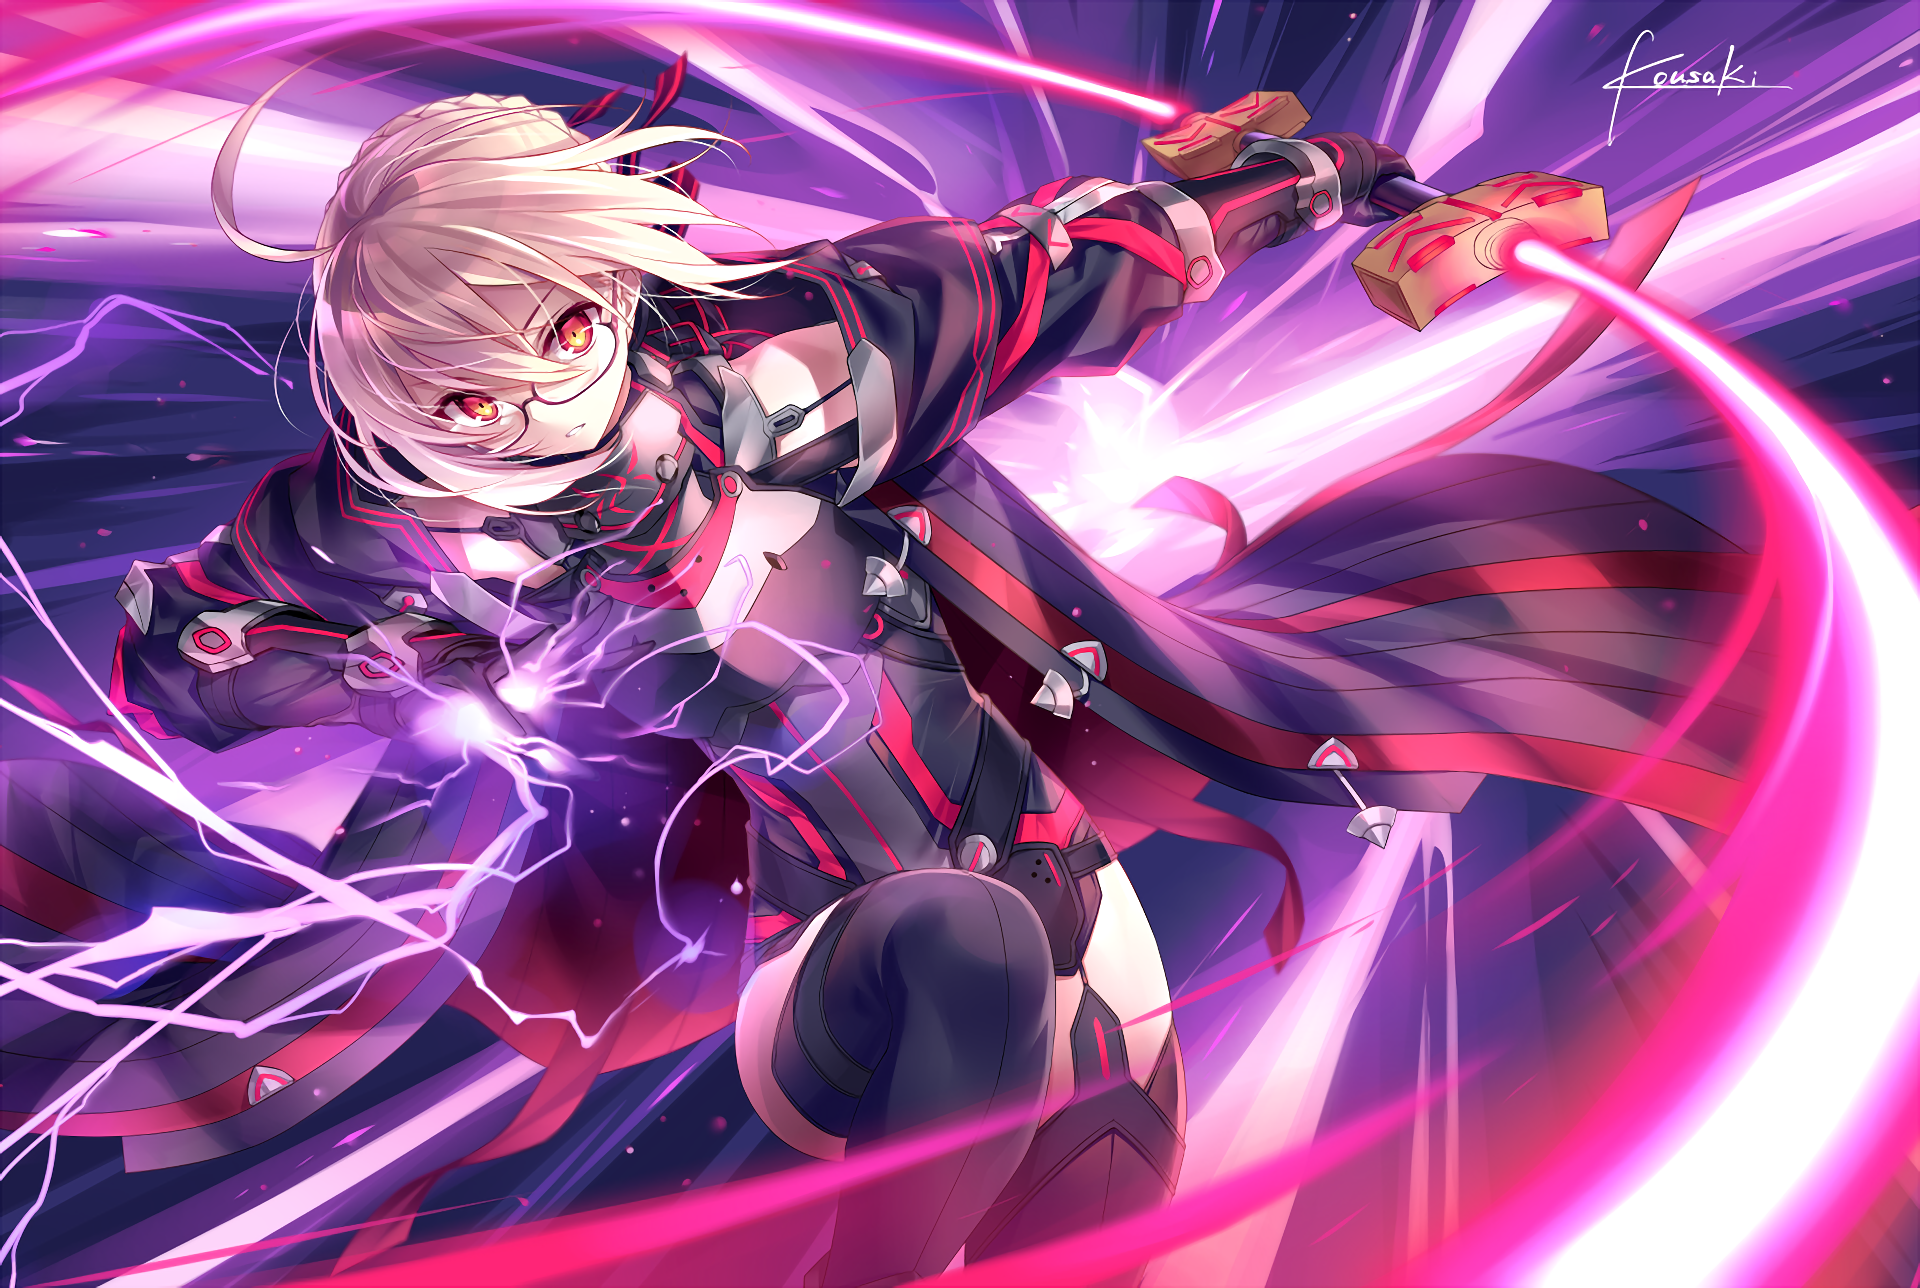 2461 Fate Grand Order Hd Wallpapers Background Images Wallpaper Abyss